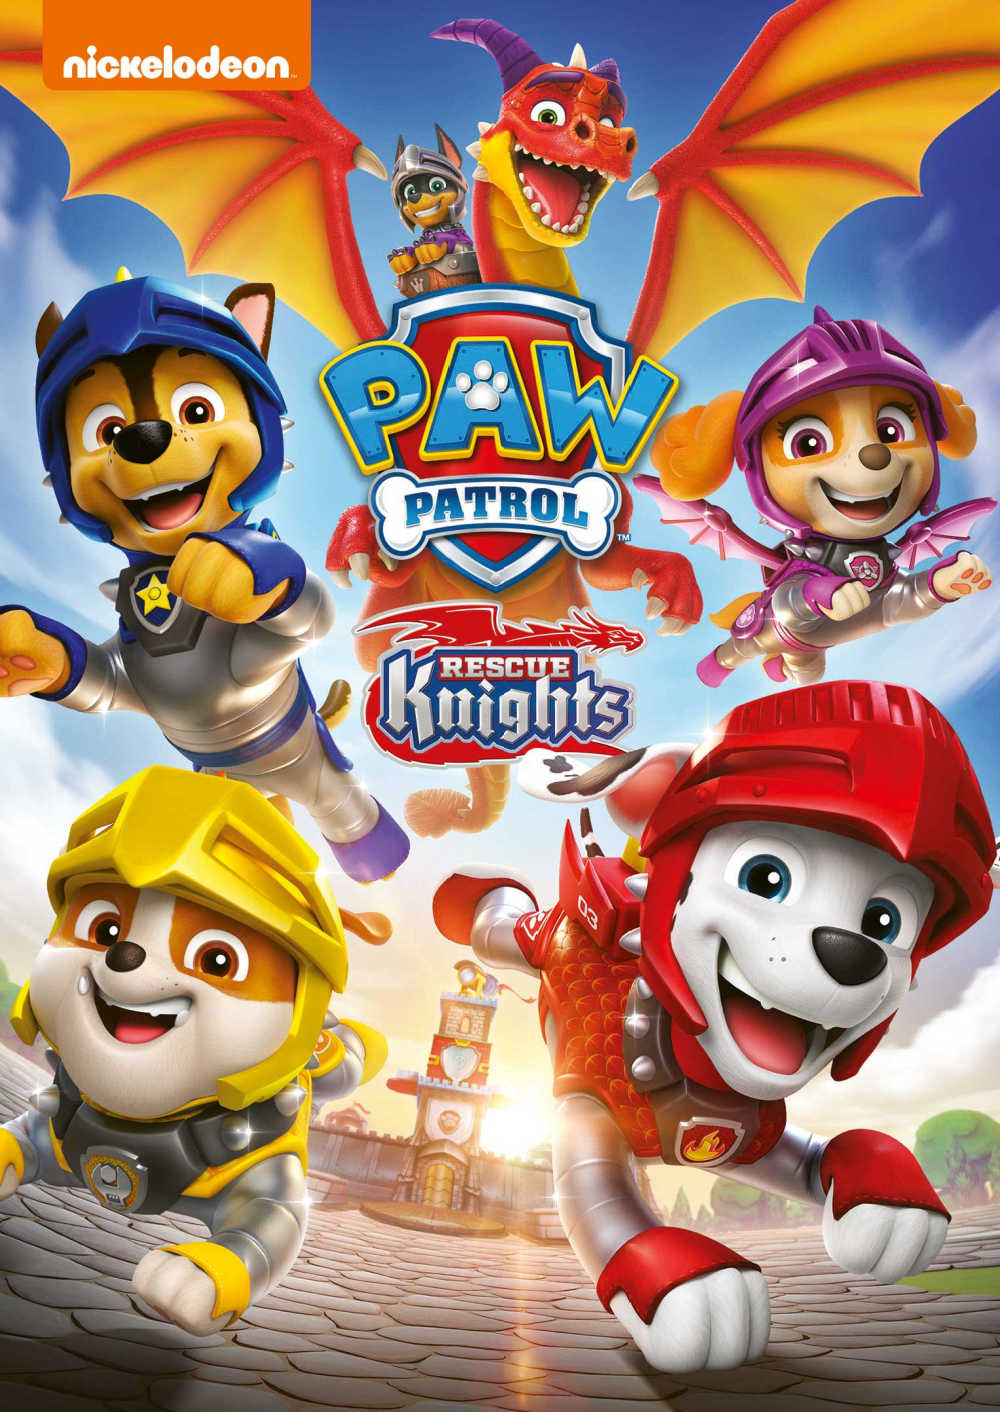 Get the new Nickelodeon PAW Patrol Knights Rescue DVD, so your kids can watch these fun episodes over and over again. 